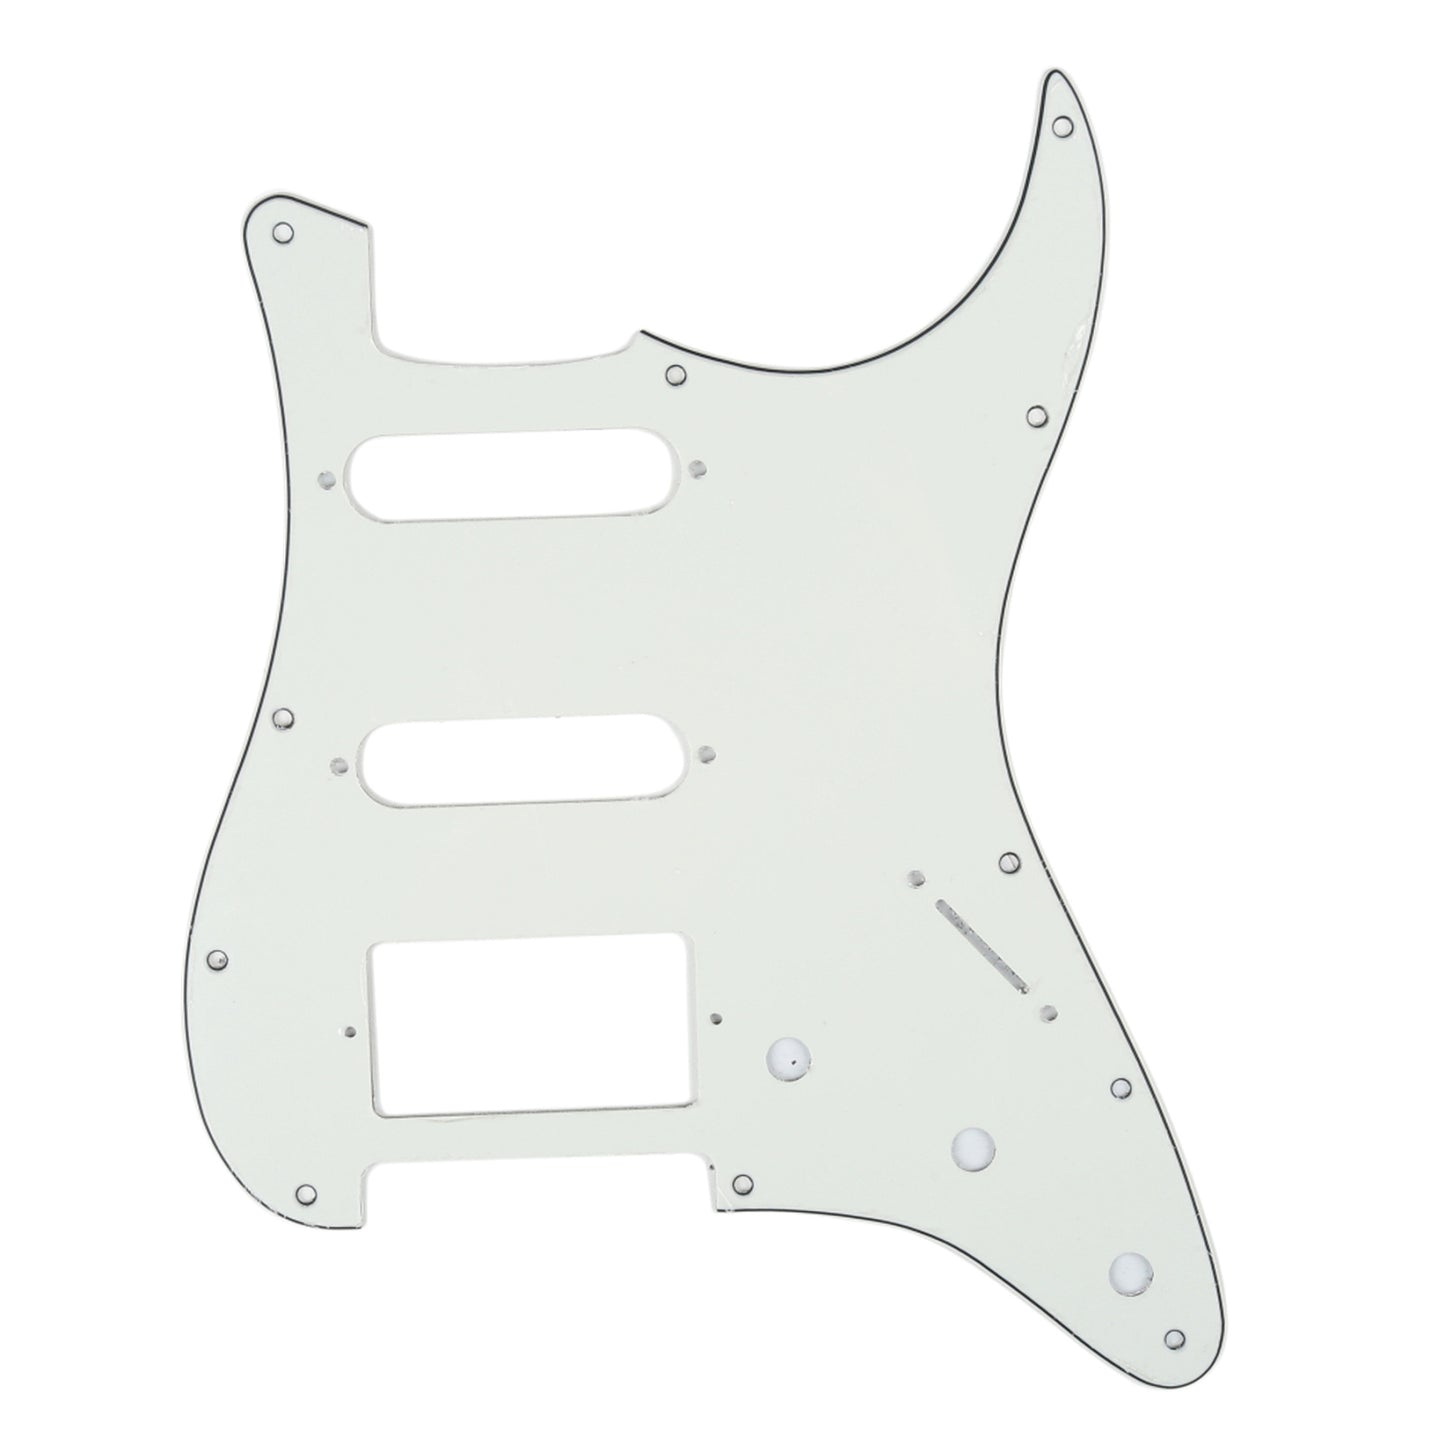 Musiclily HSS 11 Hole Guitar Strat Pickguard for Fender USA/Mexican Made Standard Stratocaster Modern Style,3Ply Parchment